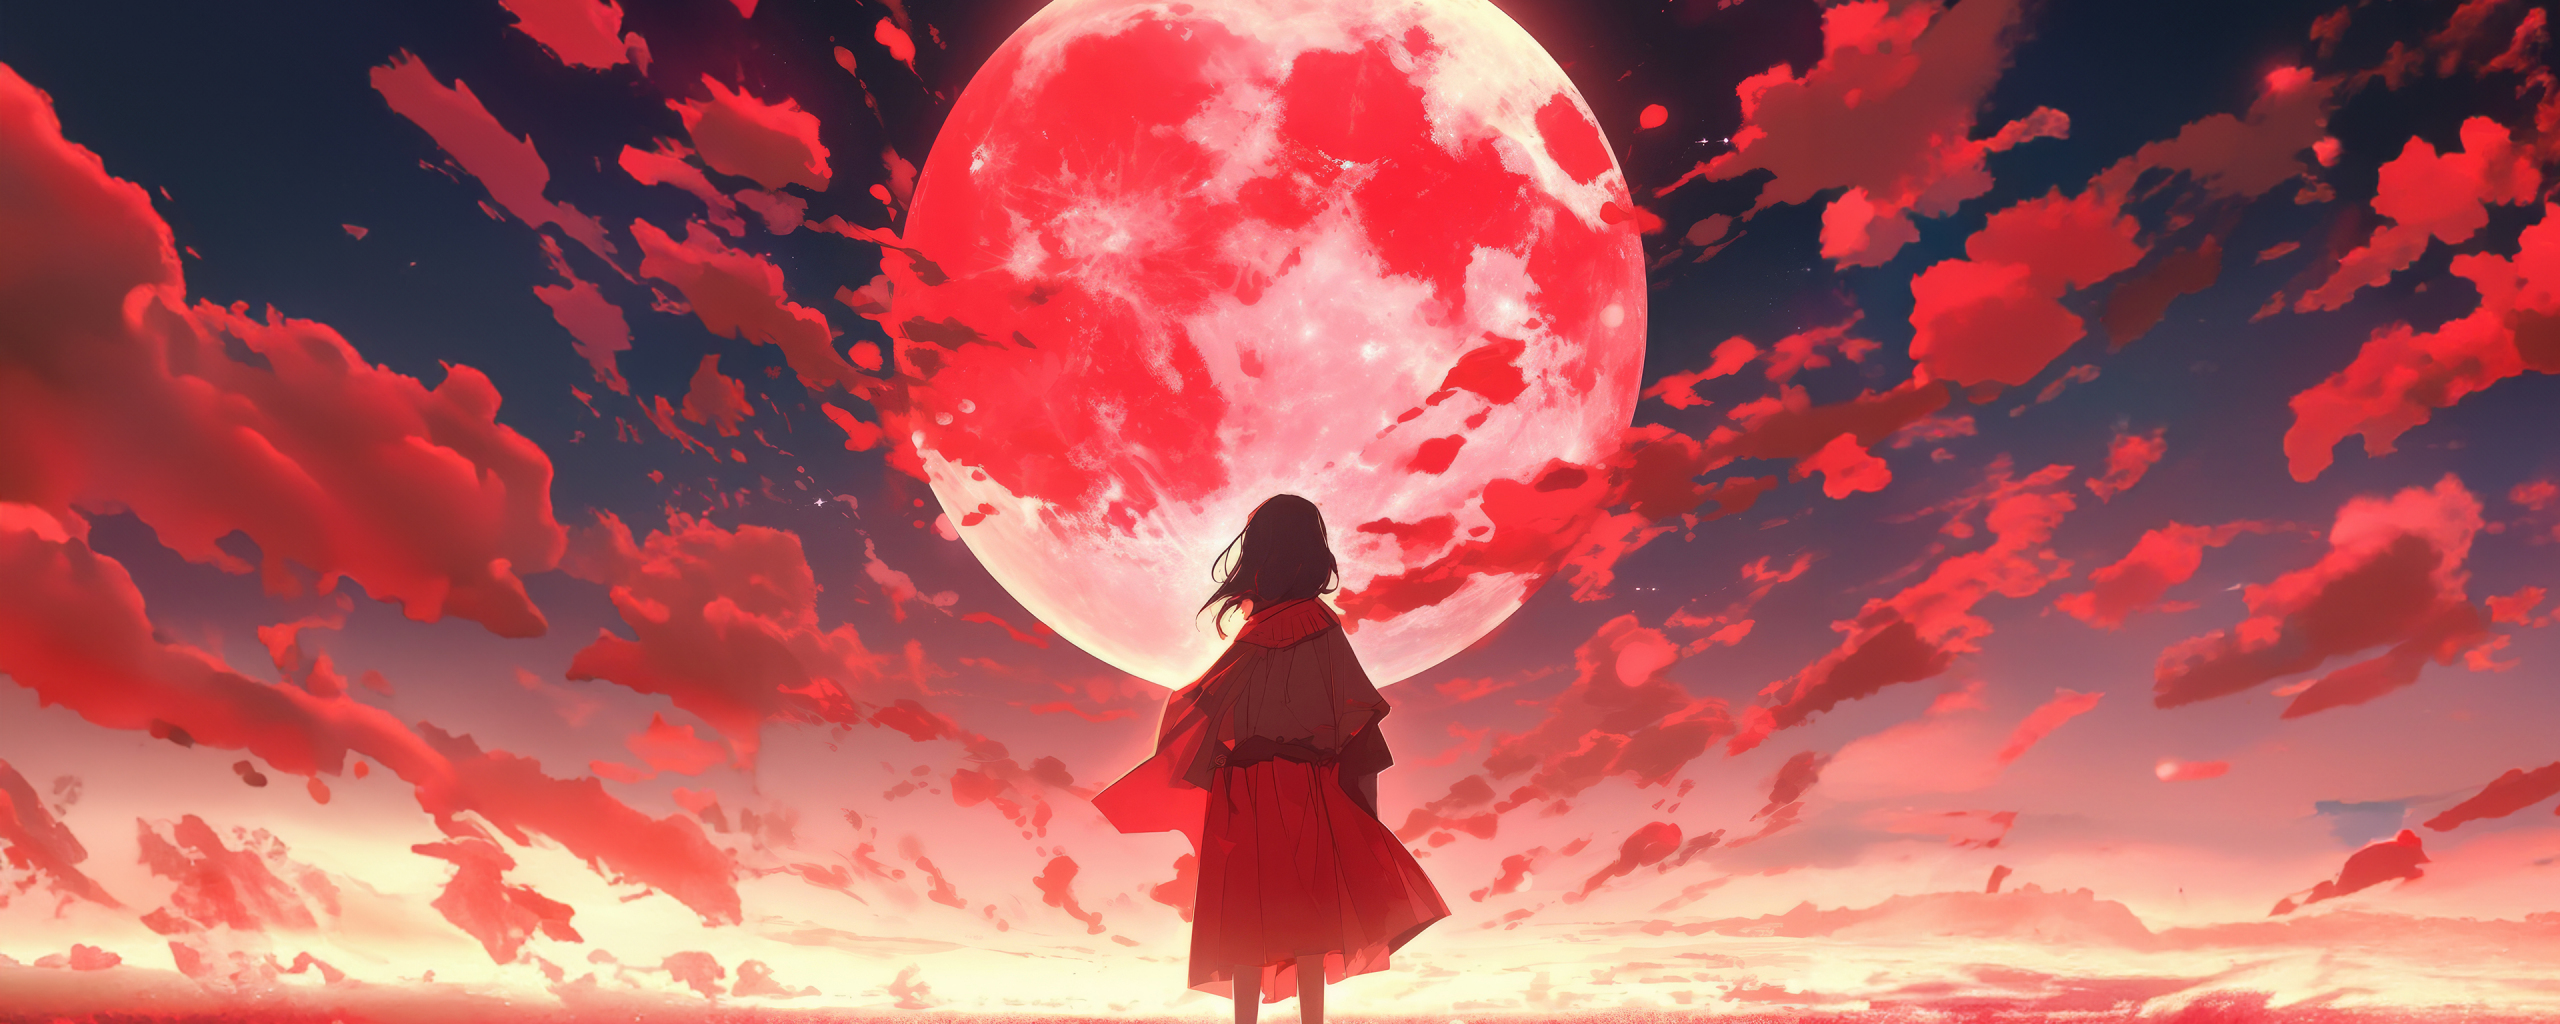 A world full of red, moon, anime, 2560x1024 wallpaper